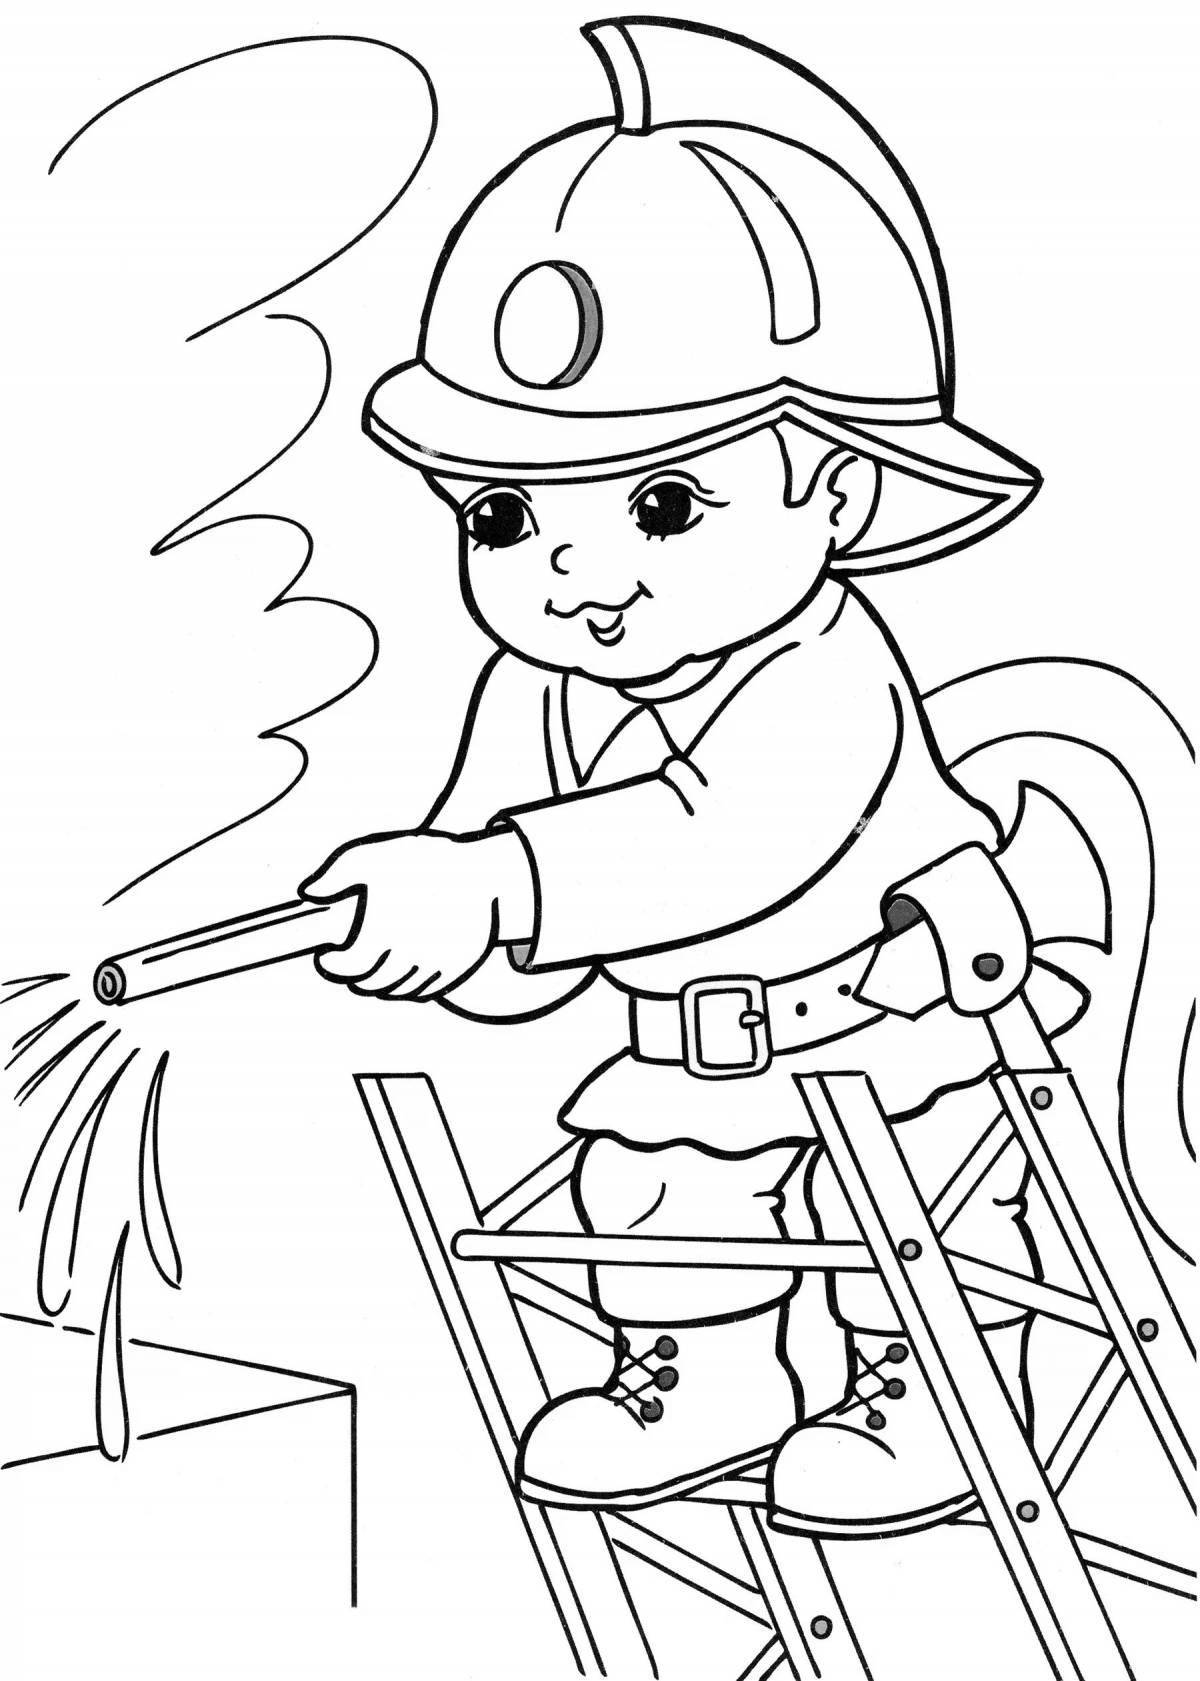 Coloring page playful farmer